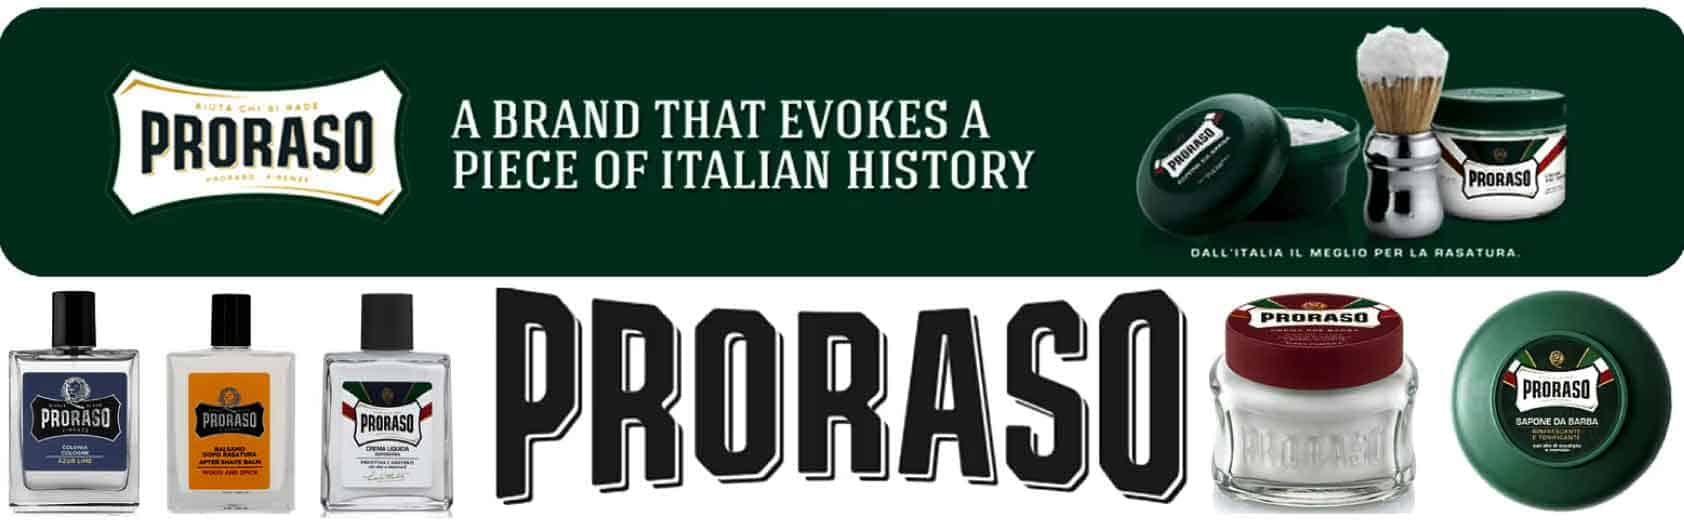 Proraso Products | Lords Grooming Products